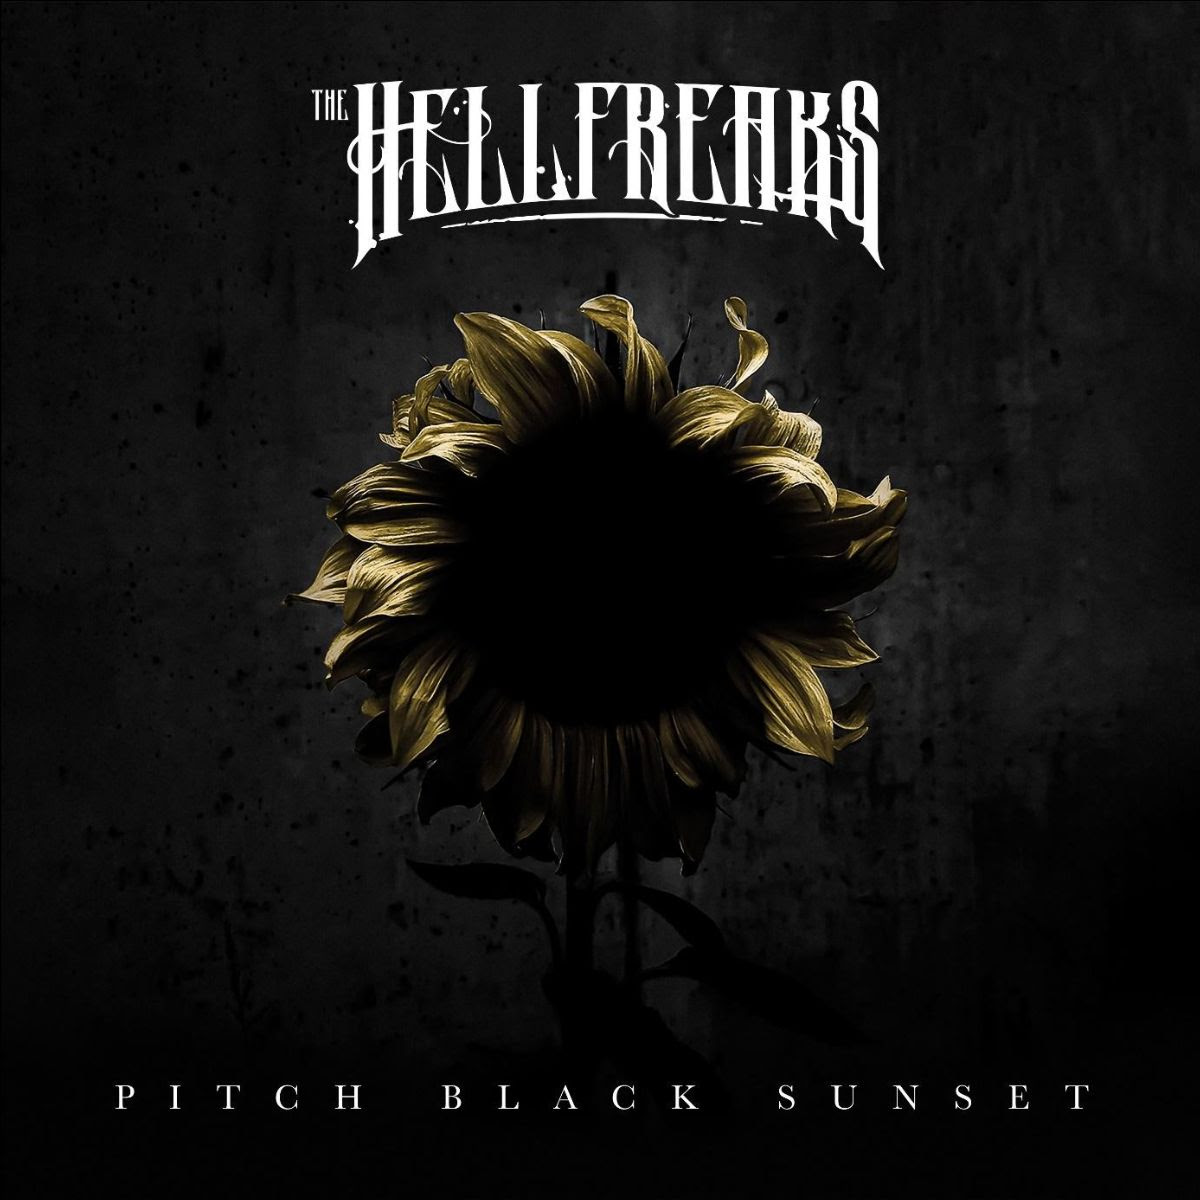 TRACK x TRACK: Pitch Black Sunset by The Hellfreaks